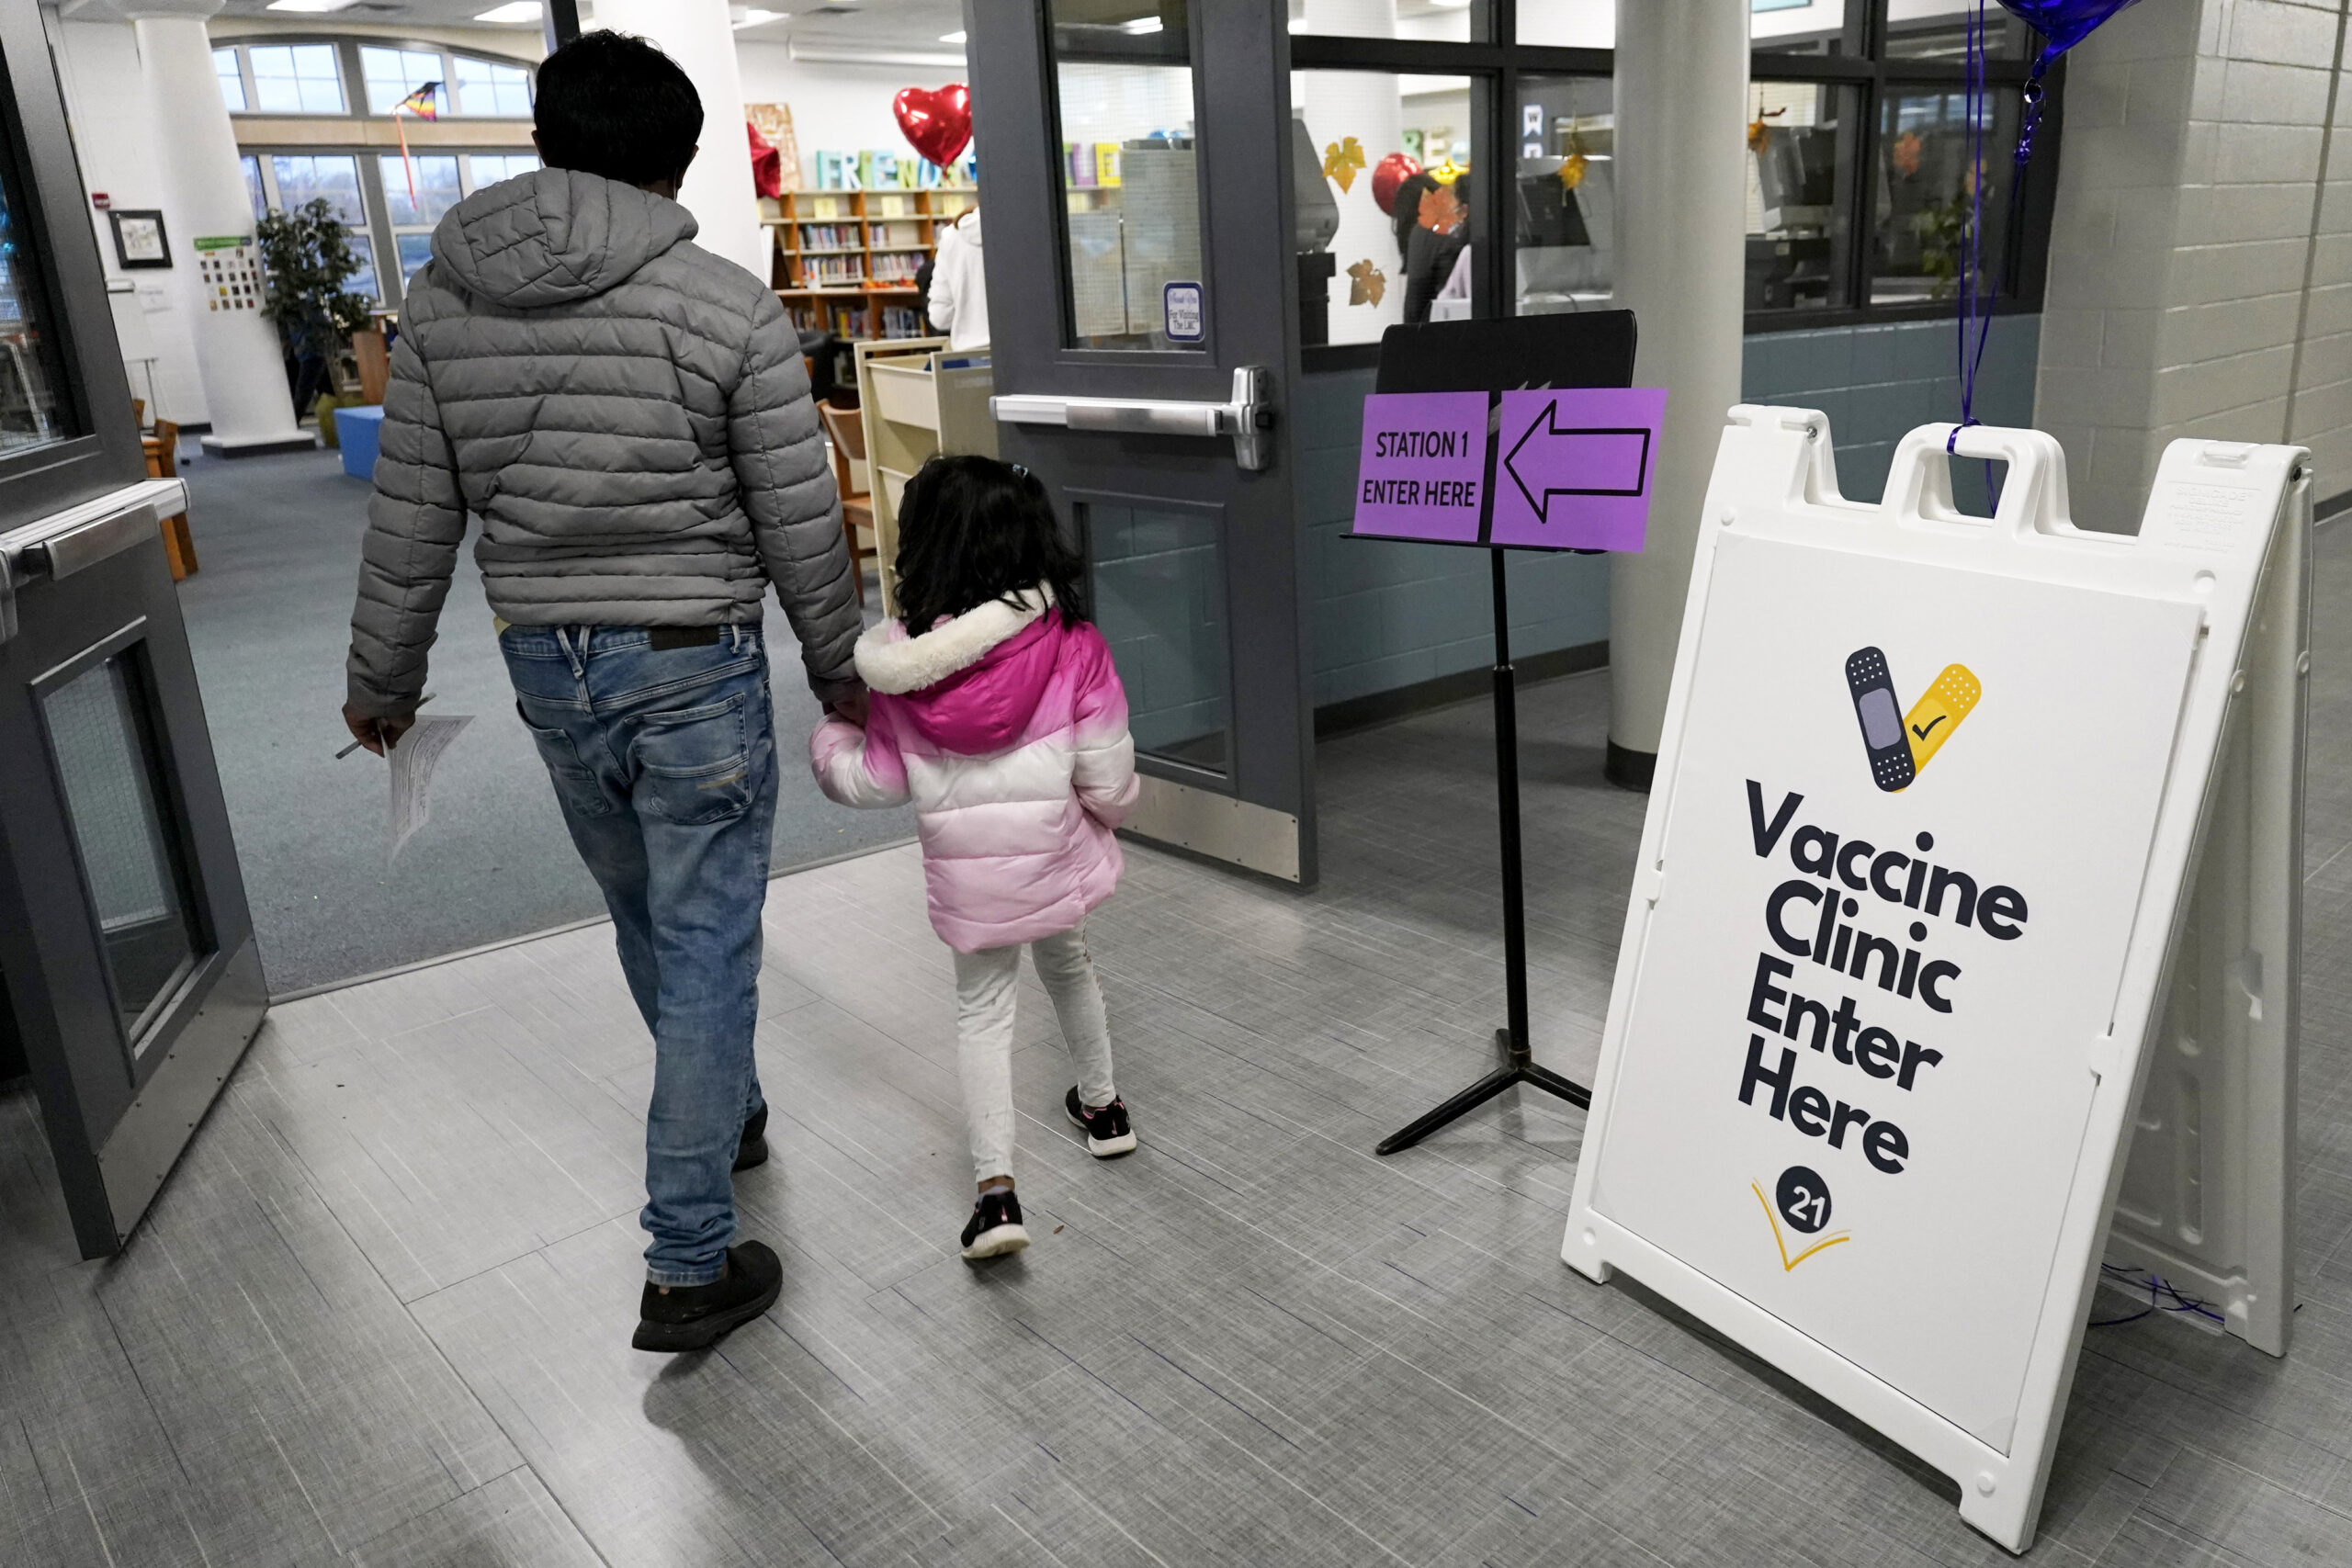 An information sign is displayed as a child arrives with her parent to receive the Pfizer COVID-19 vaccine